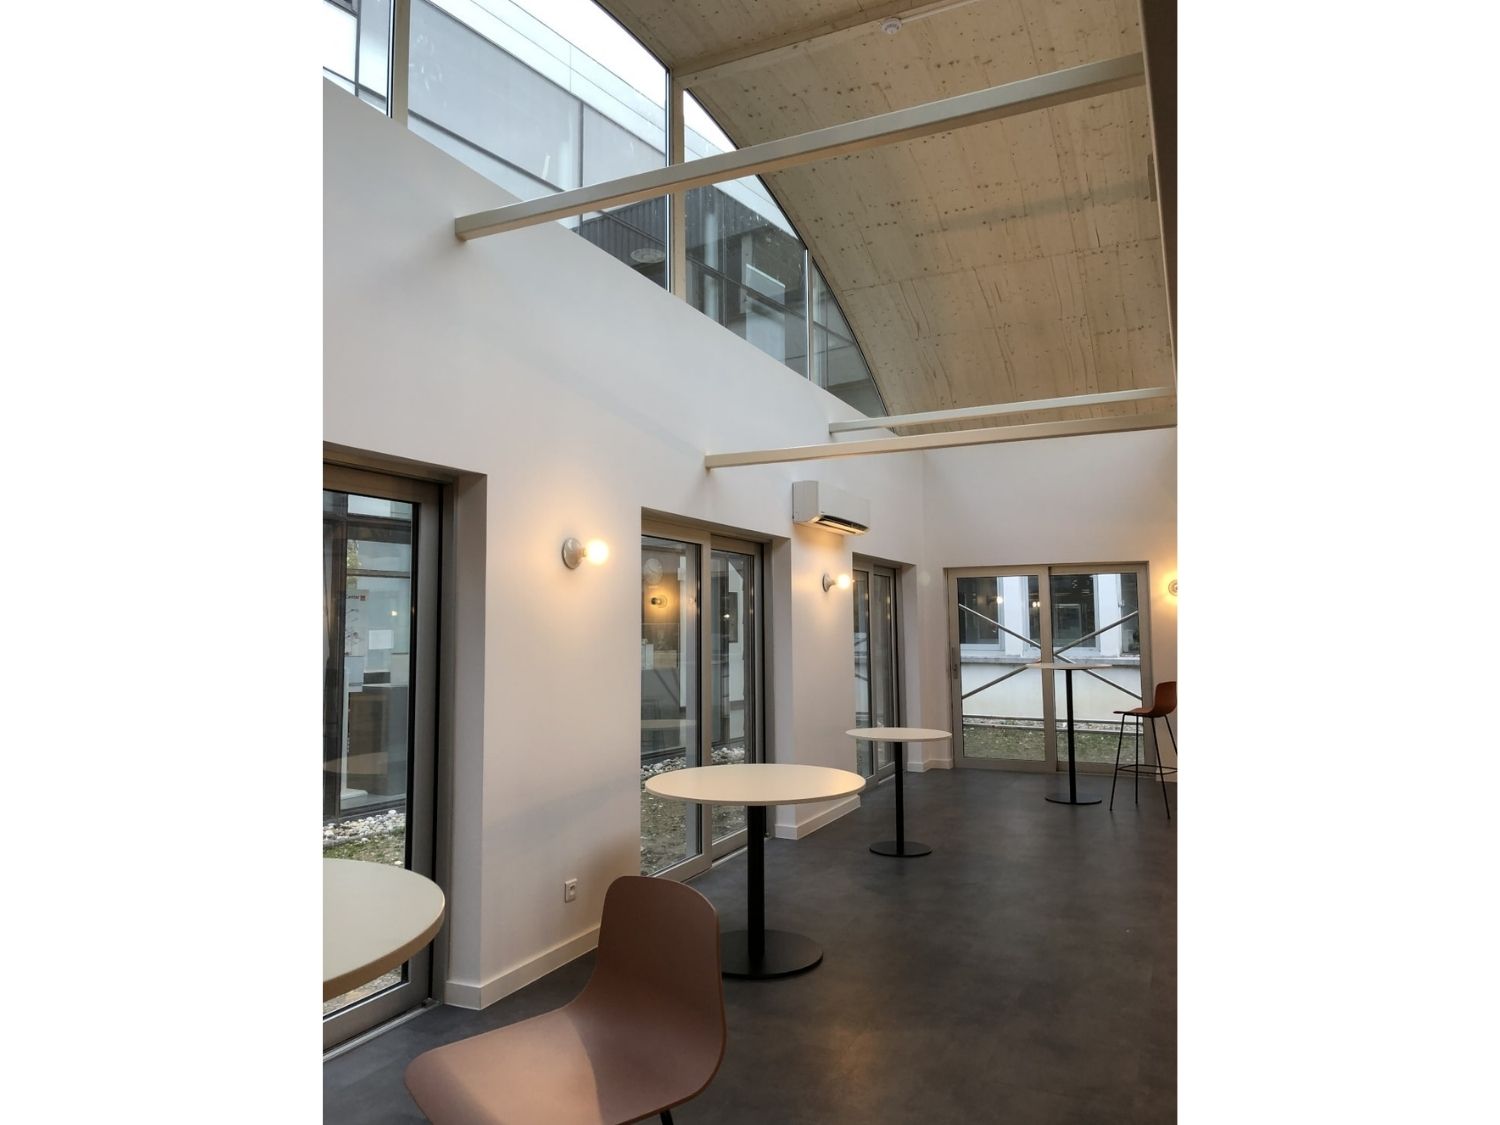 Interieur-modulaire-refectoire-chambery.jpg